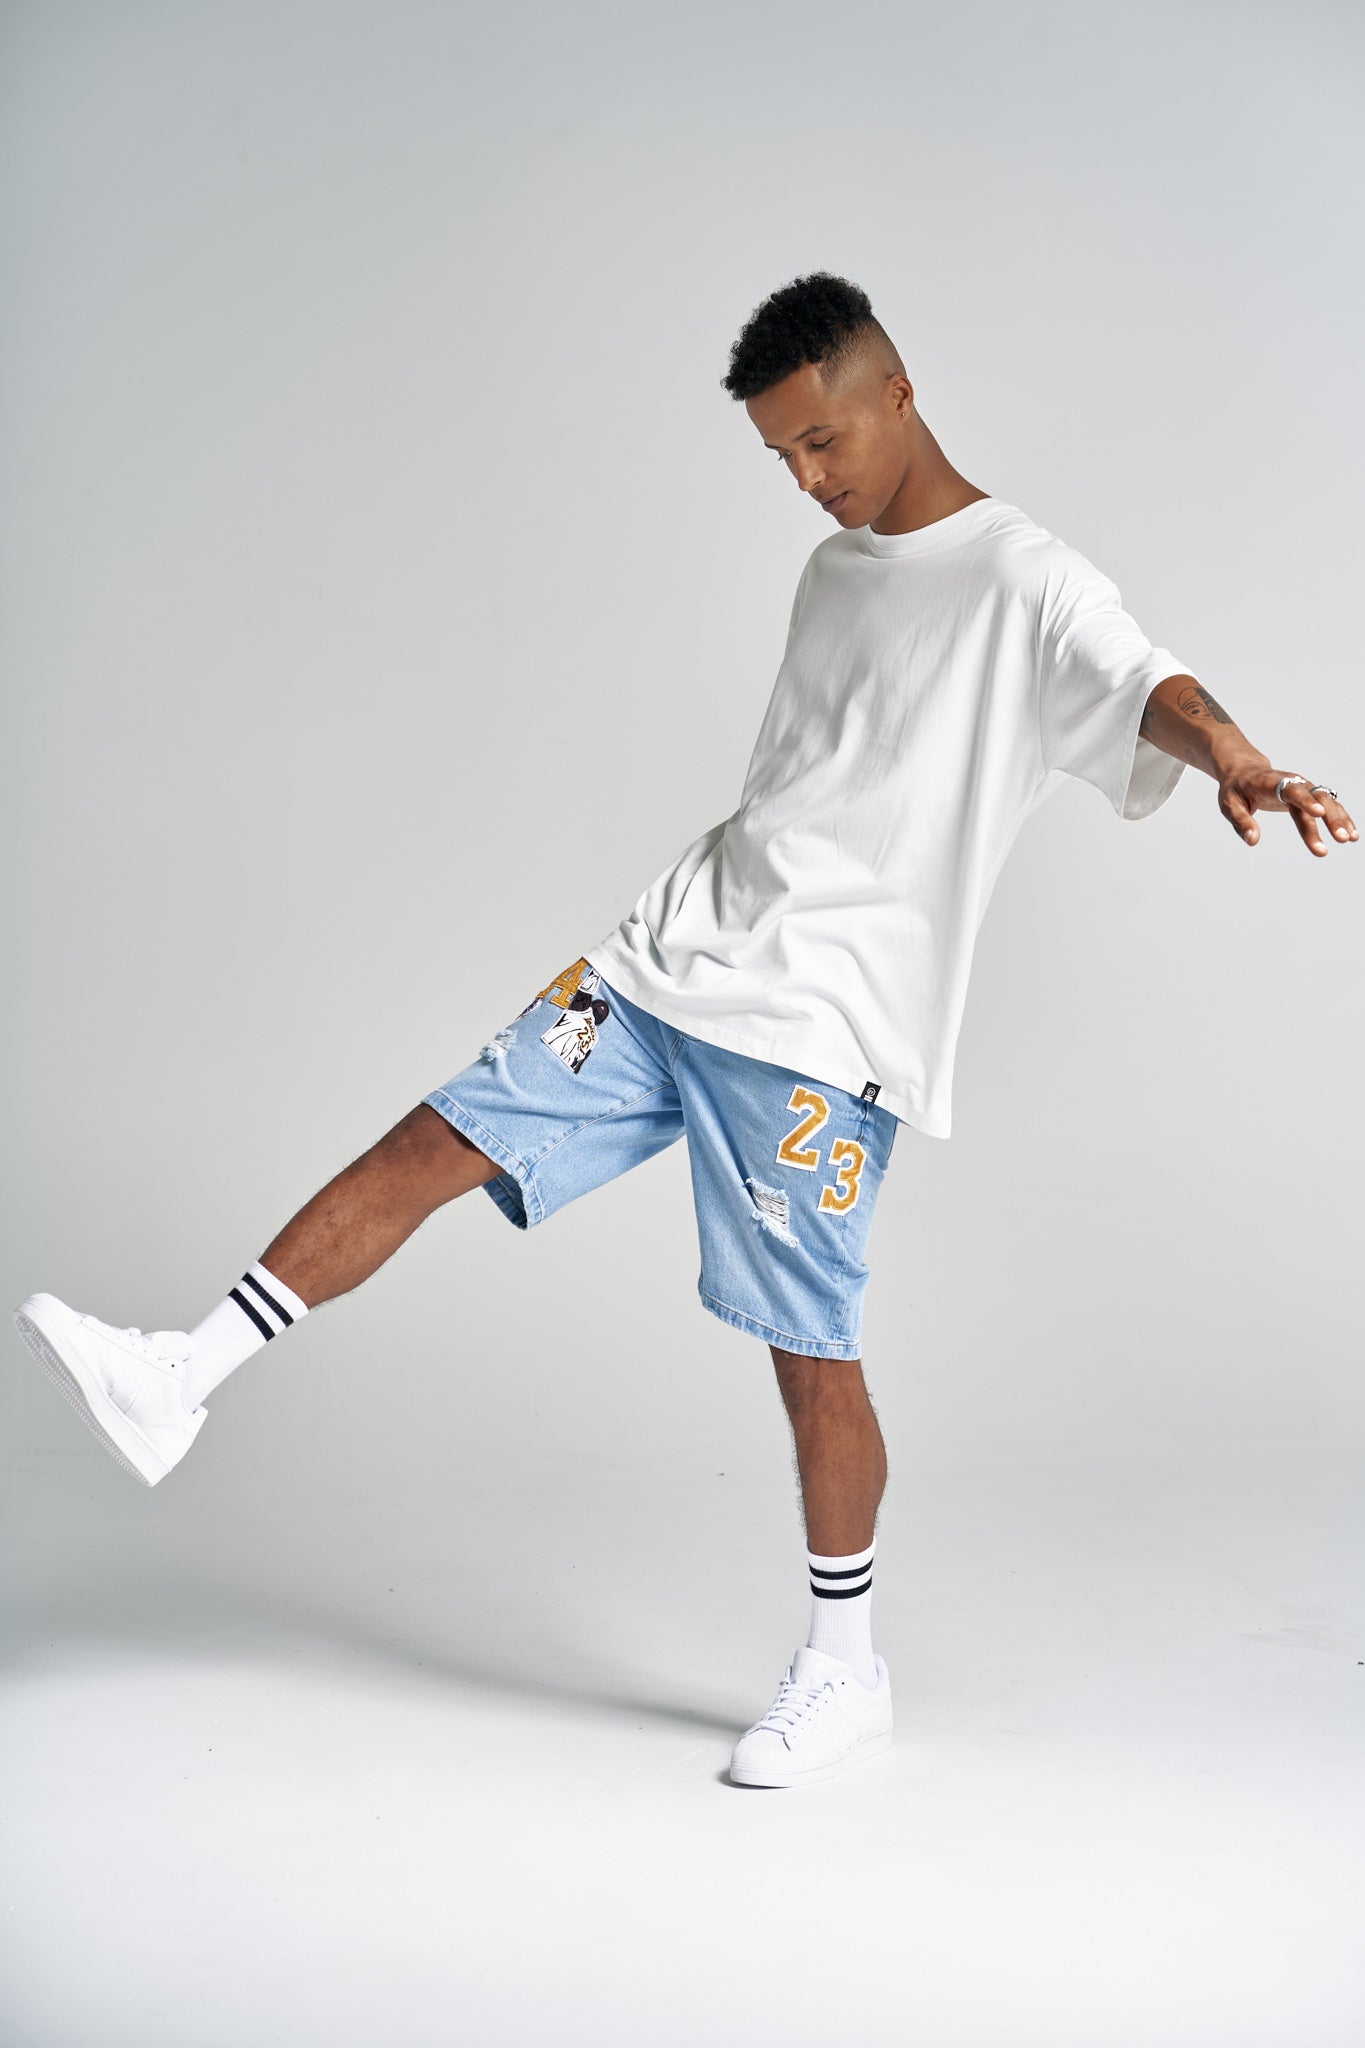 LA Patch Work Blue Ripped Shorts - UNEFFECTED STUDIOS® - Shorts - UNEFFECTED STUDIOS®